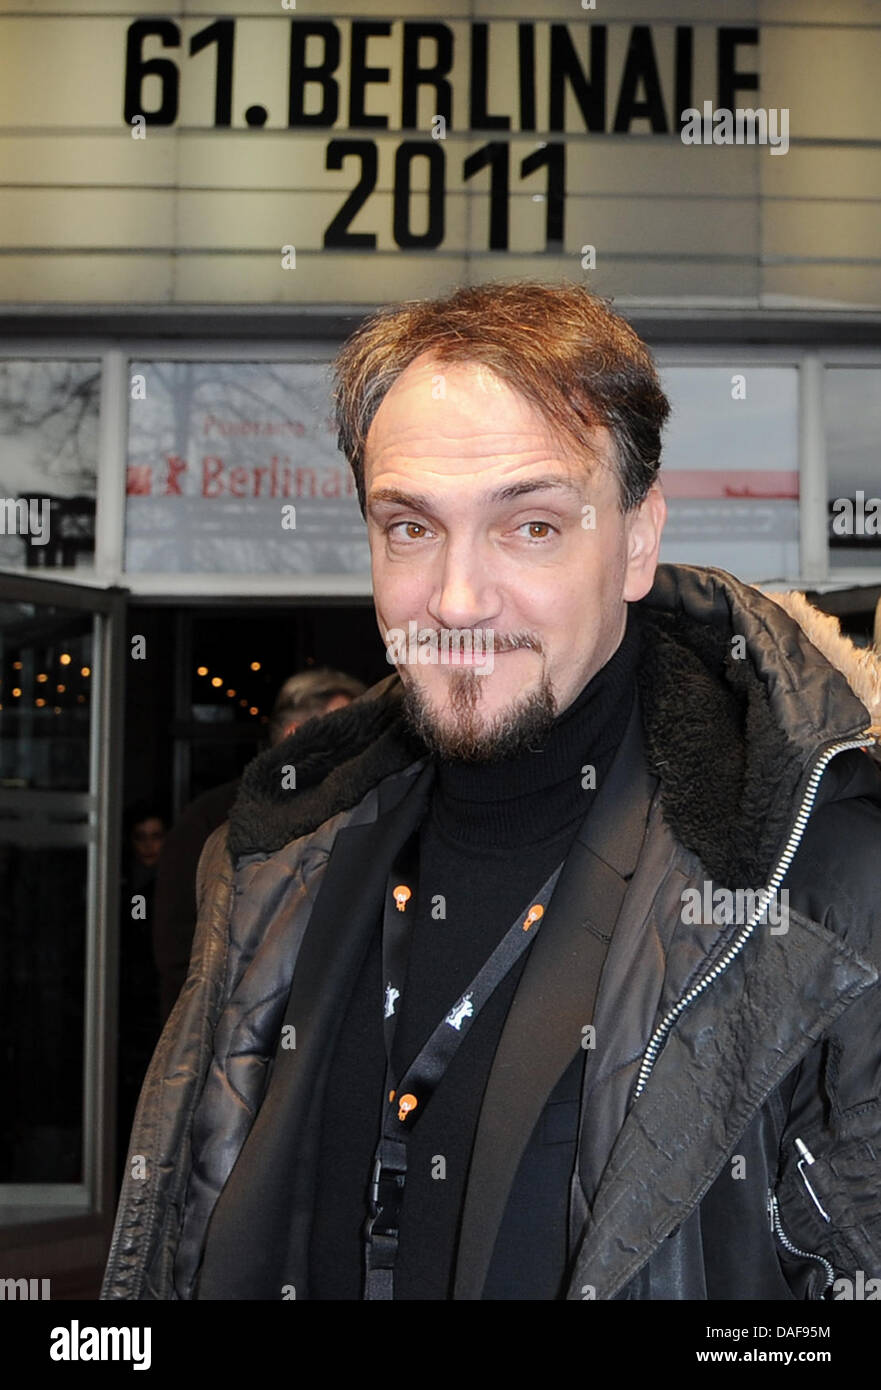 Russian director Cyril Tuschi (L) arrives for the premiere of his film 'Khodorkovsky' during the 61st Berlin International Film Festival, in Berlin, Germany, 14 February 2011. The film is shown in the section Panorama Dokumente during the Berlin International Film Festival. The 61st Berlinale takes place from 10 to 20 February 2011. Photo: Britta Pedersen Stock Photo